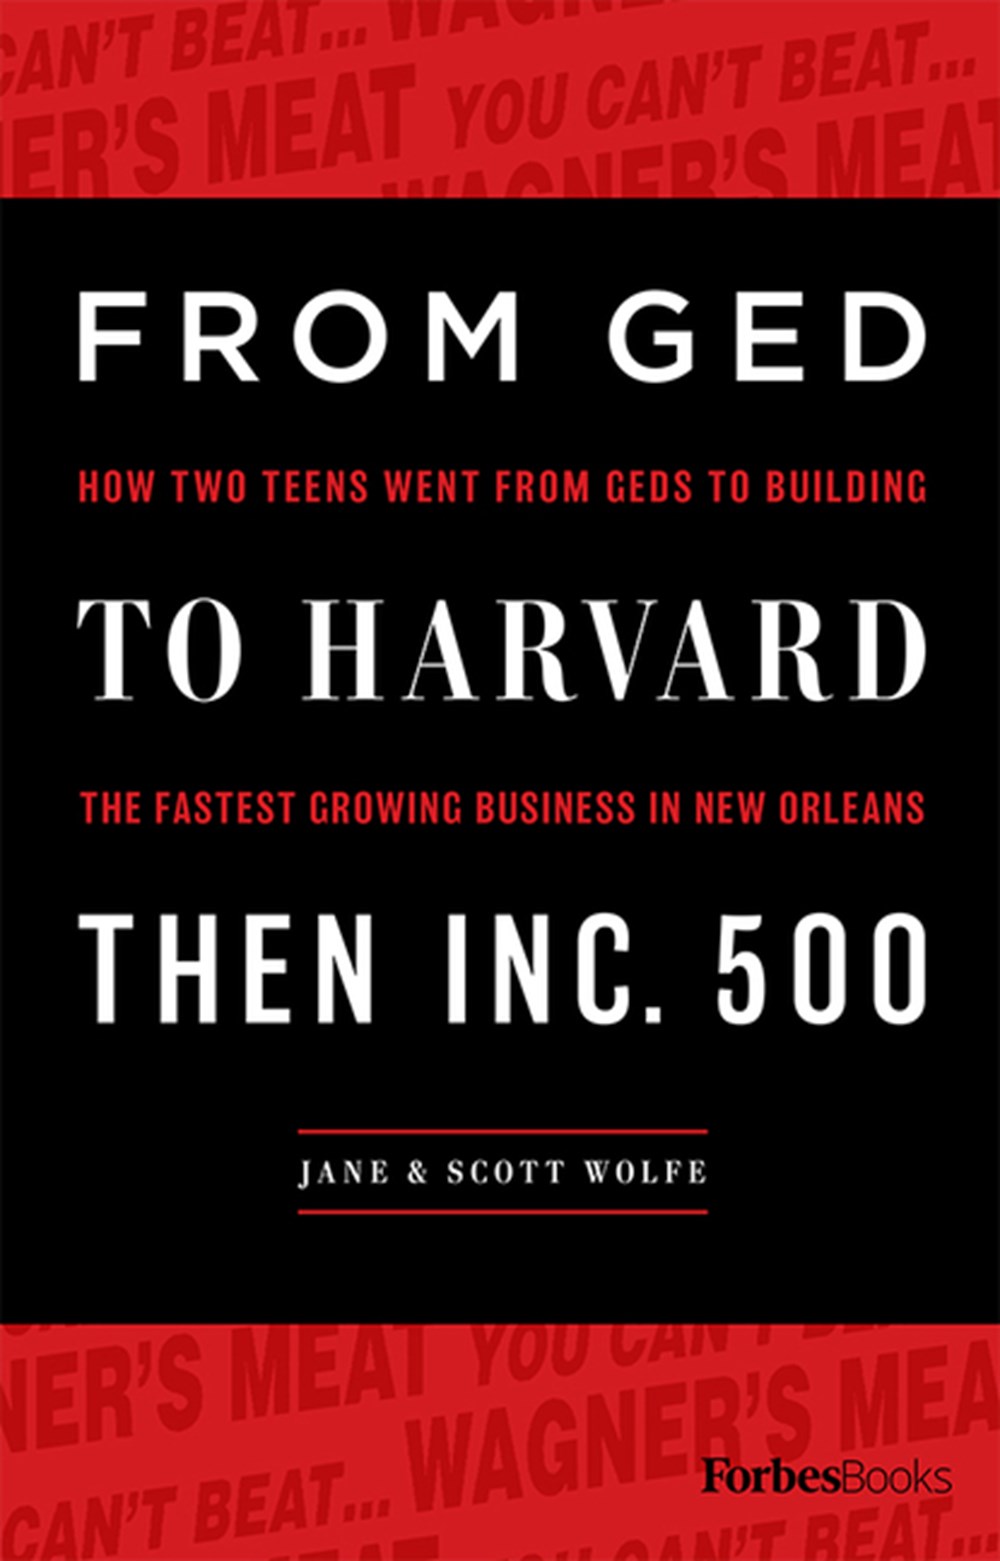 From GED to Harvard Then Inc. 500 How Two Teens Went from Geds to Building the Fastest Growing Busin